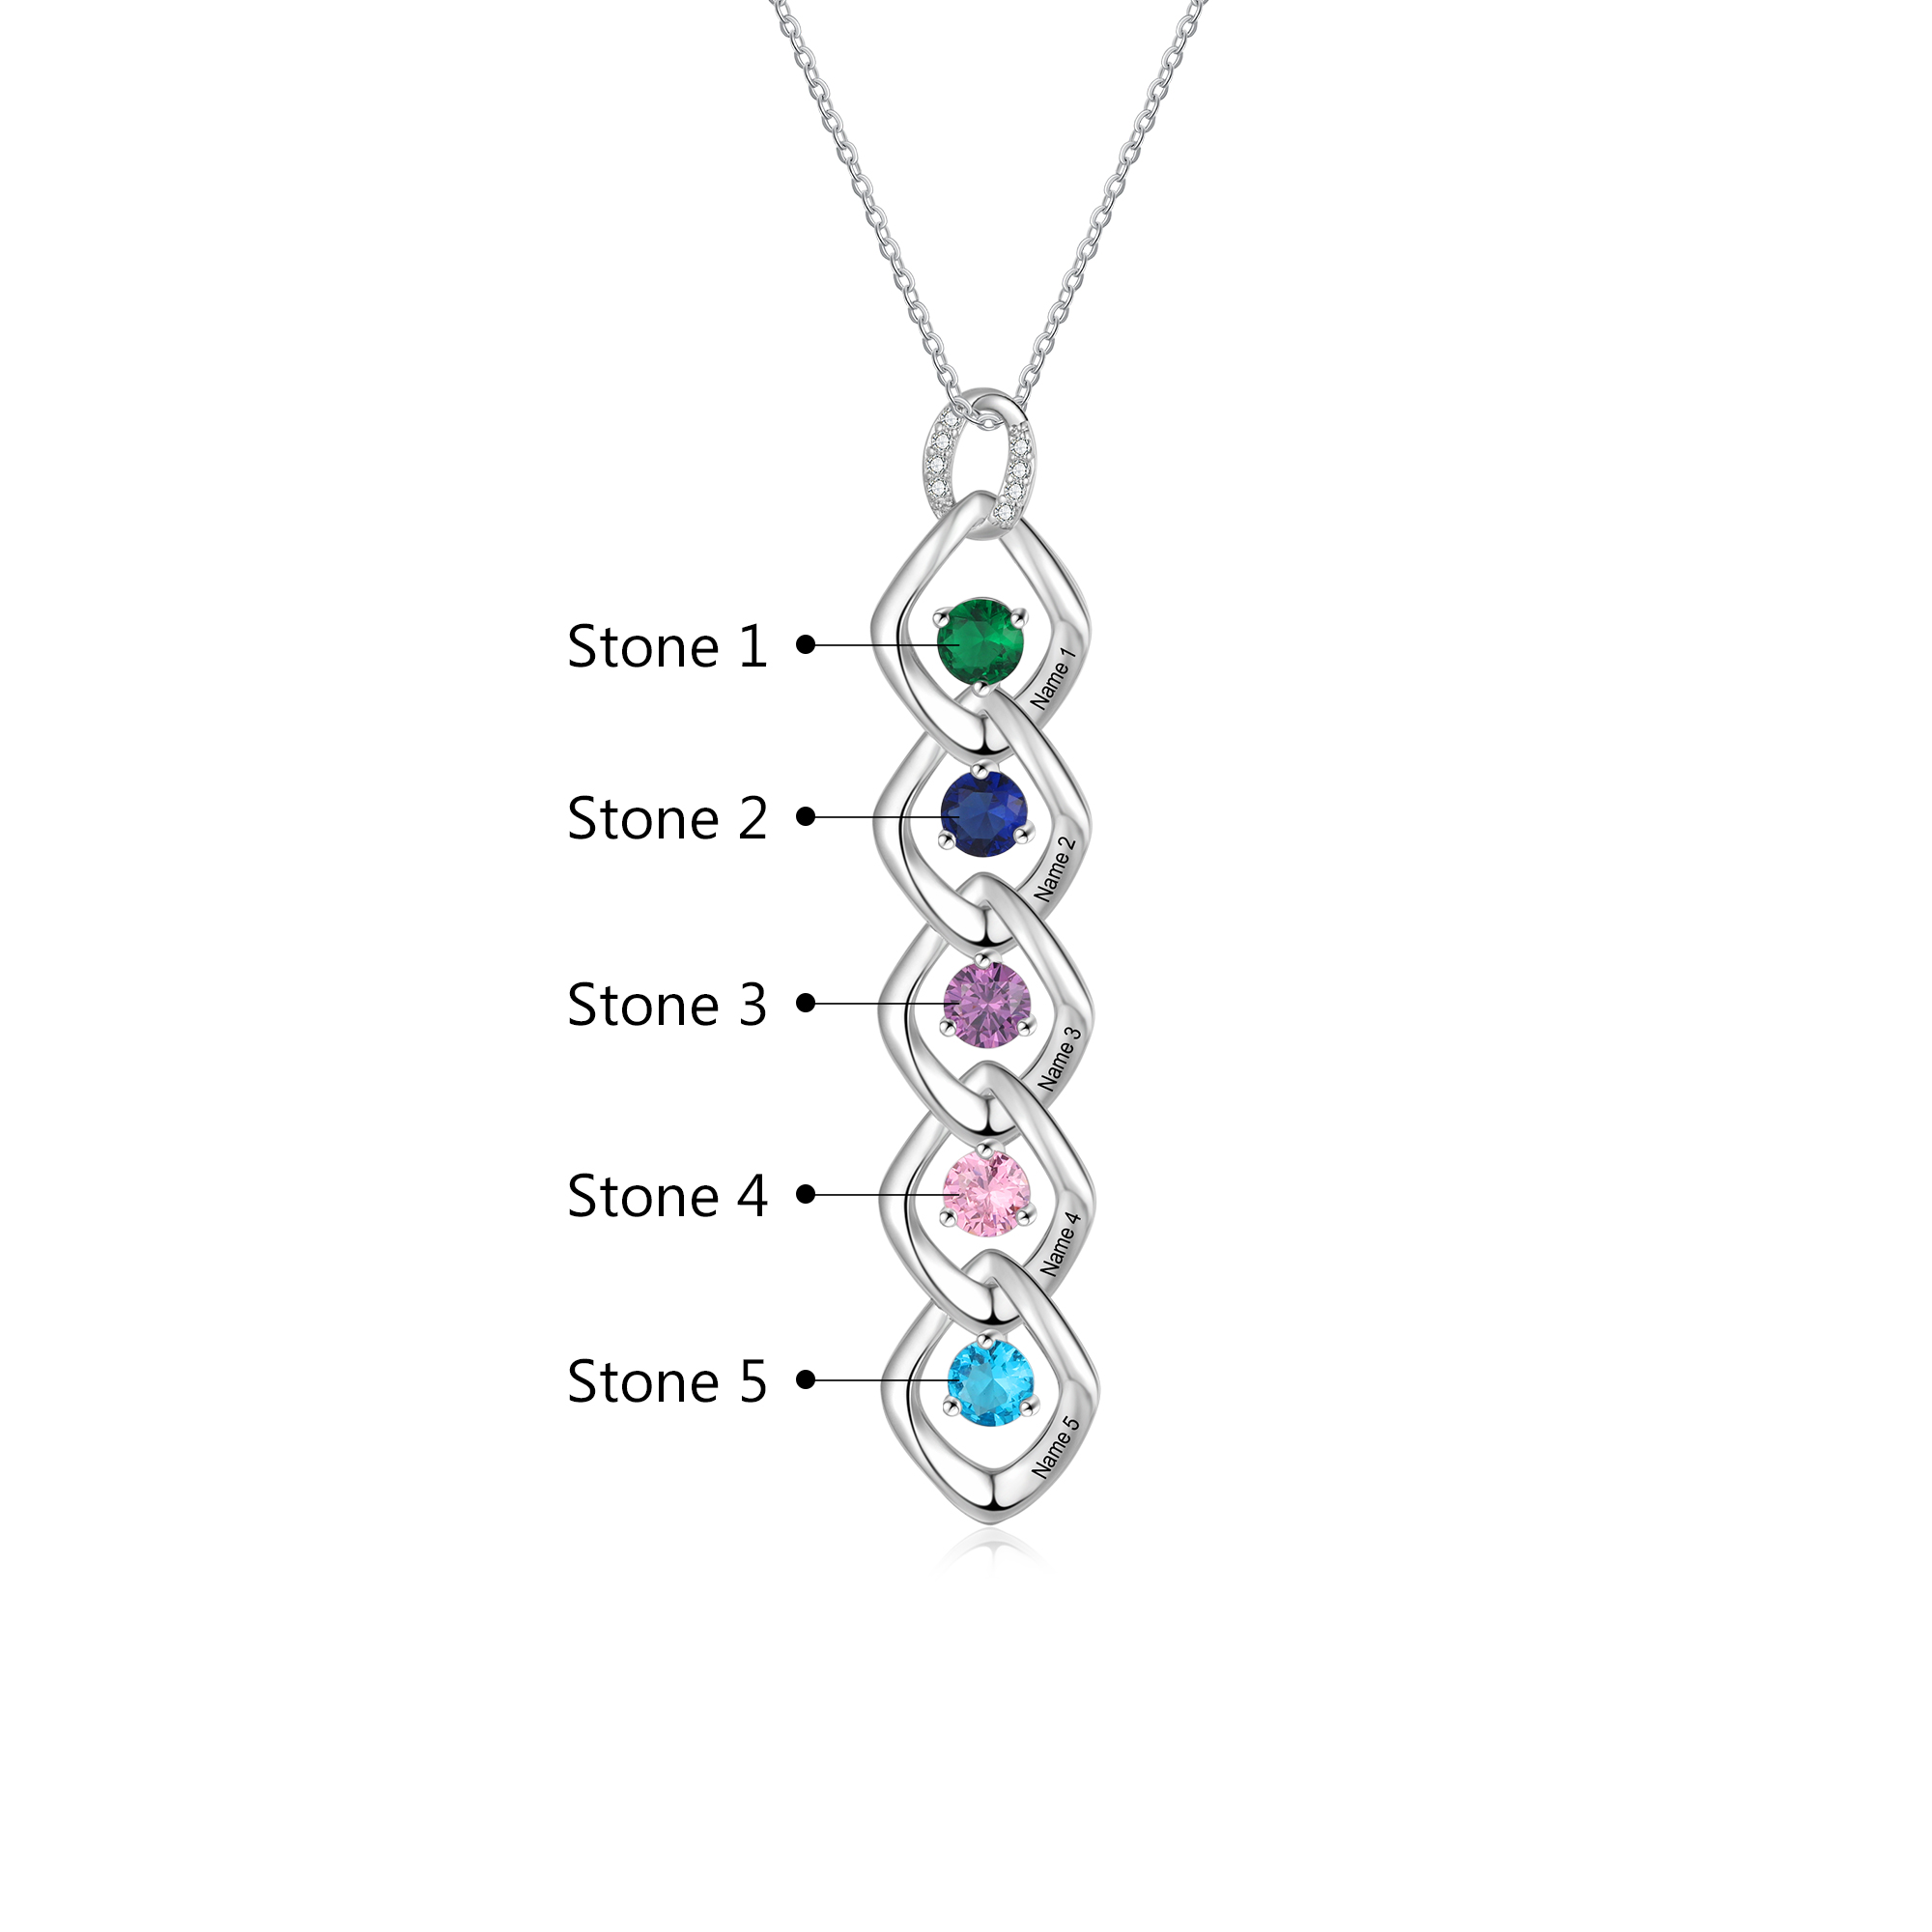 5 Names - Personalized Birthstone Necklace With Name Engraved For A Special Gift For Mom/Grandma